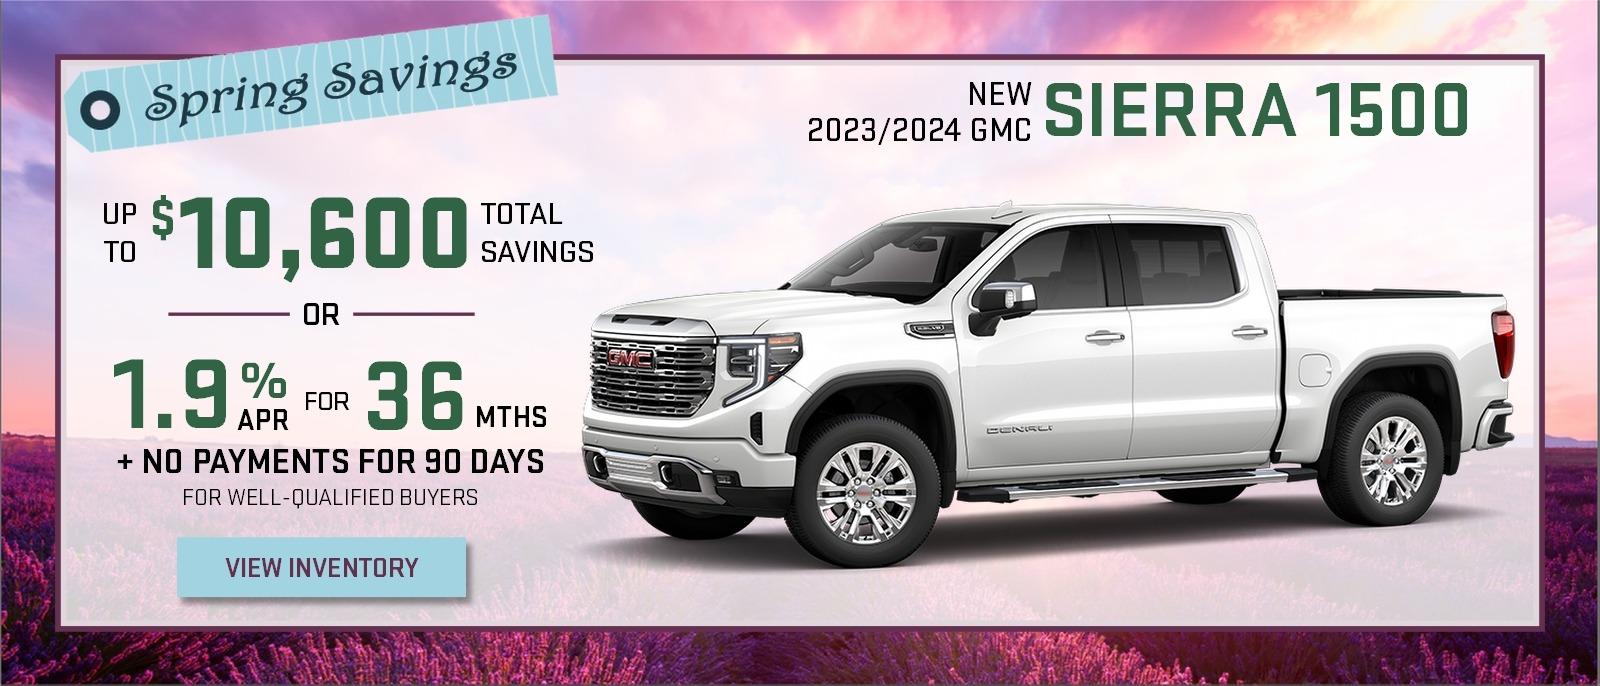 Spring Savings
New 2023/2024 GMC Sierra 1500
up to $10,600 total savings
or
1.9% APR for 36 months
PLUS NO PAYMENTS FOR 90 DAYS for well-qualified buyers
View Inventory